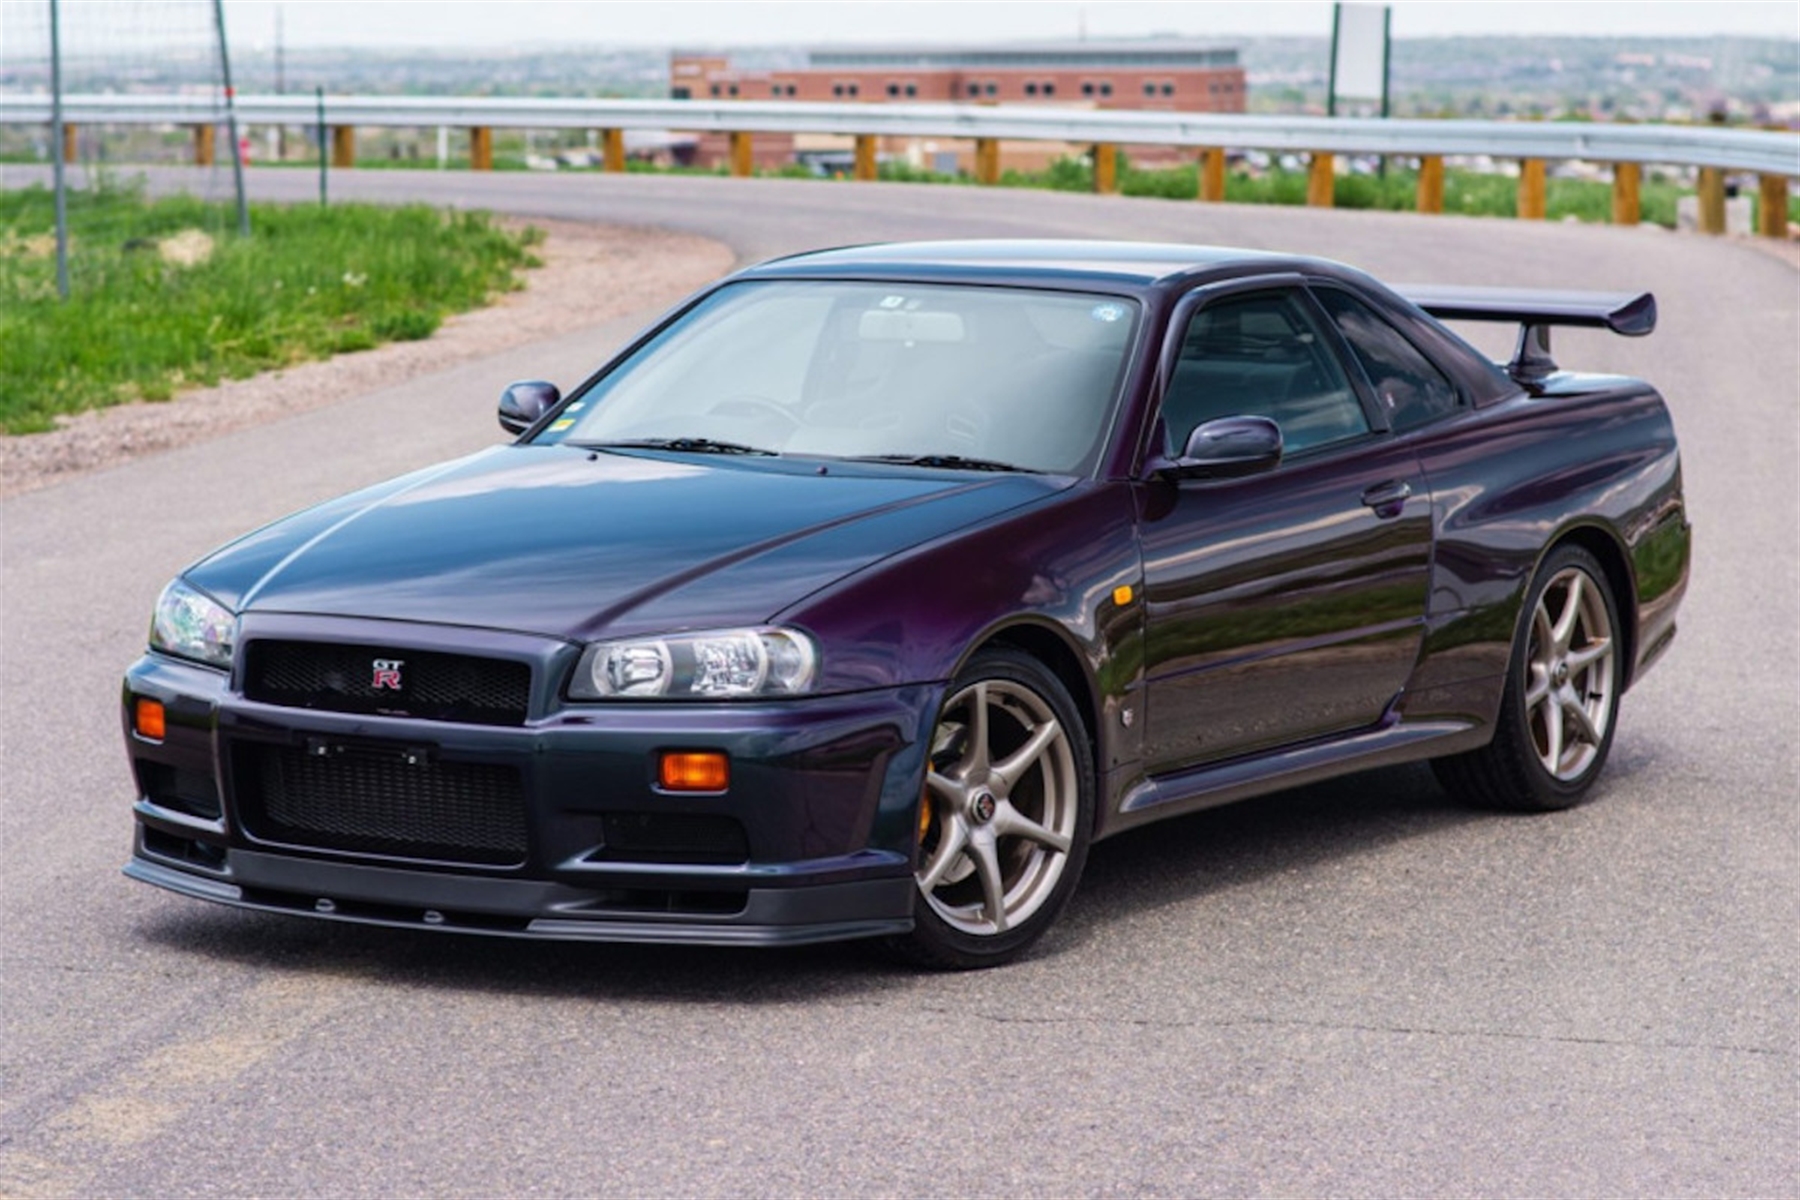 Hagerty Market Watch Nissan Skyline Gt R R34s Are Hot Property In Us Magneto